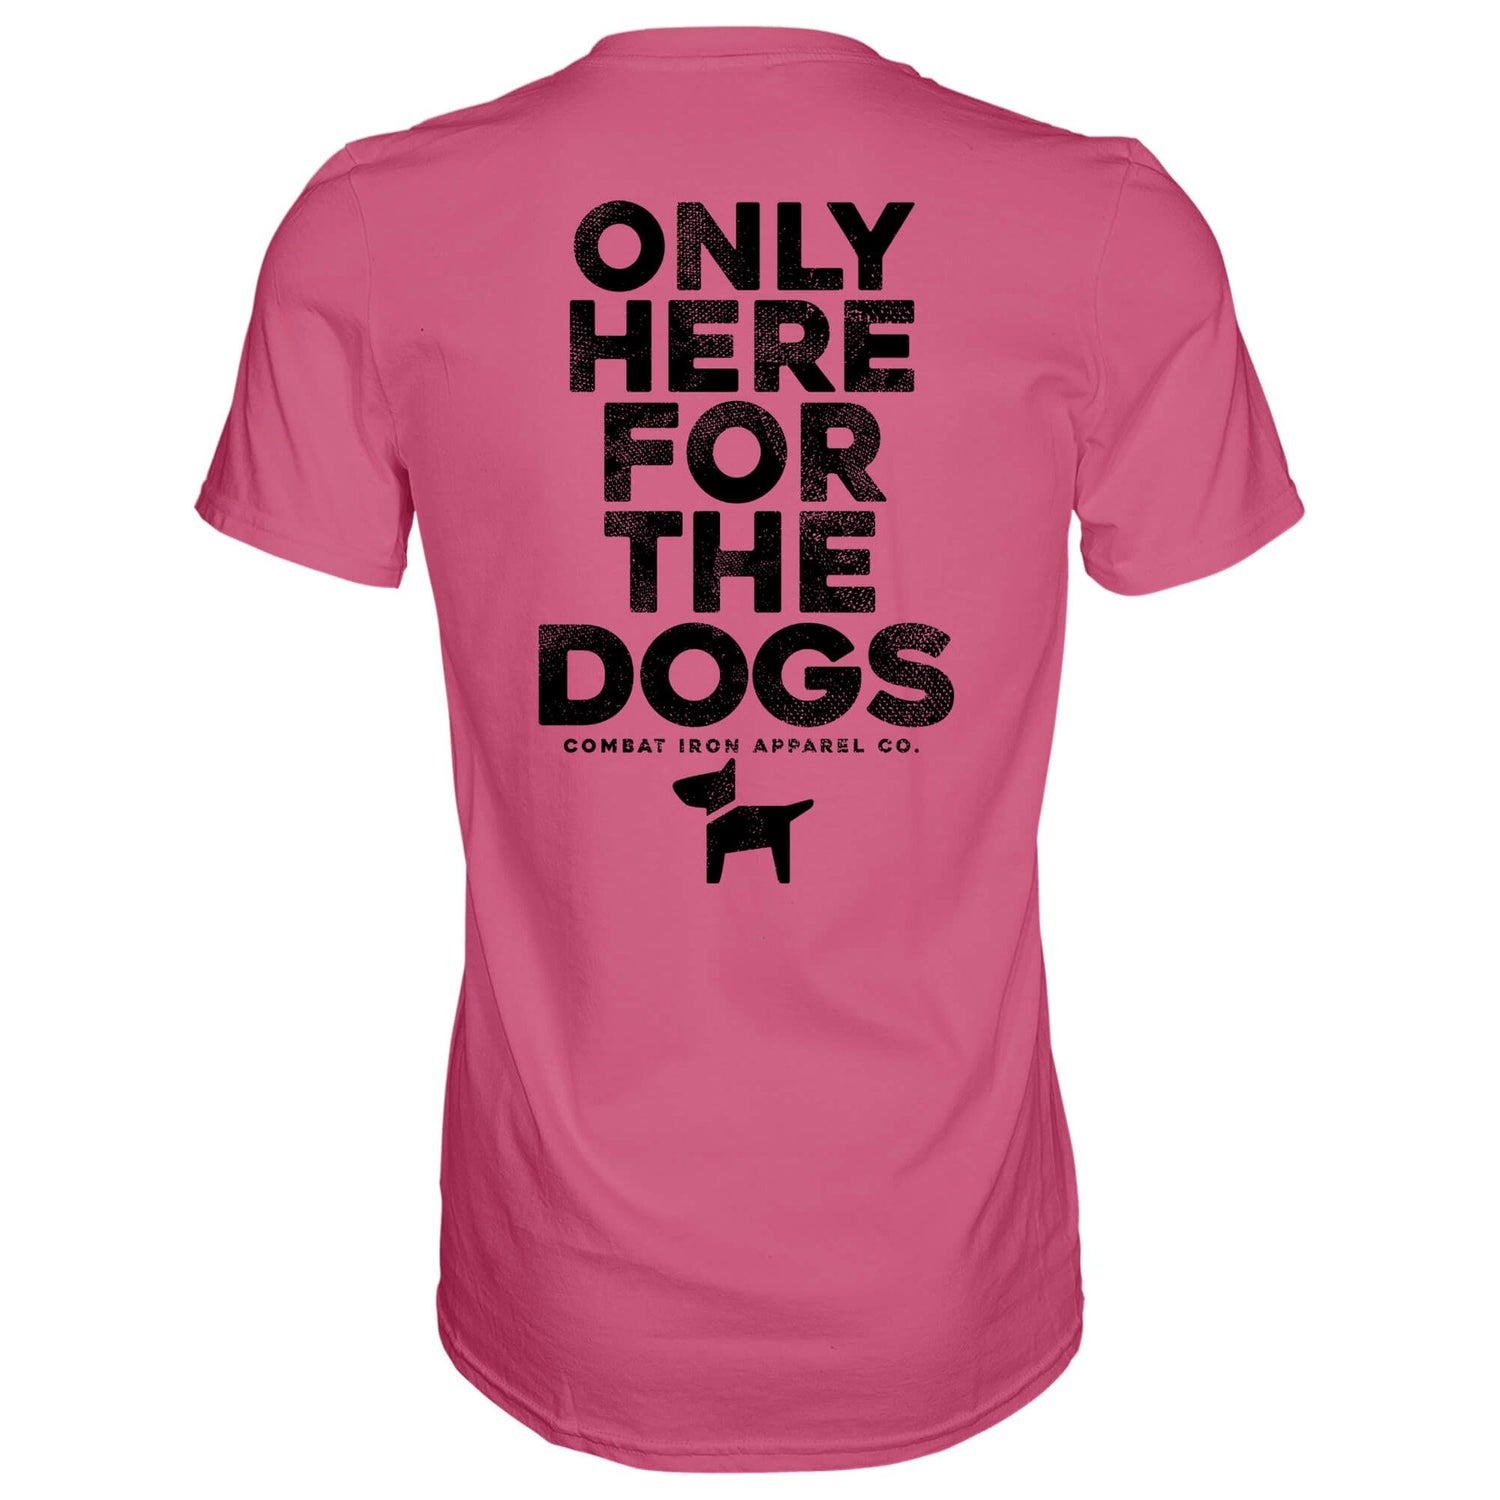 ONLY HERE FOR THE DOGS Men's T-Shirt